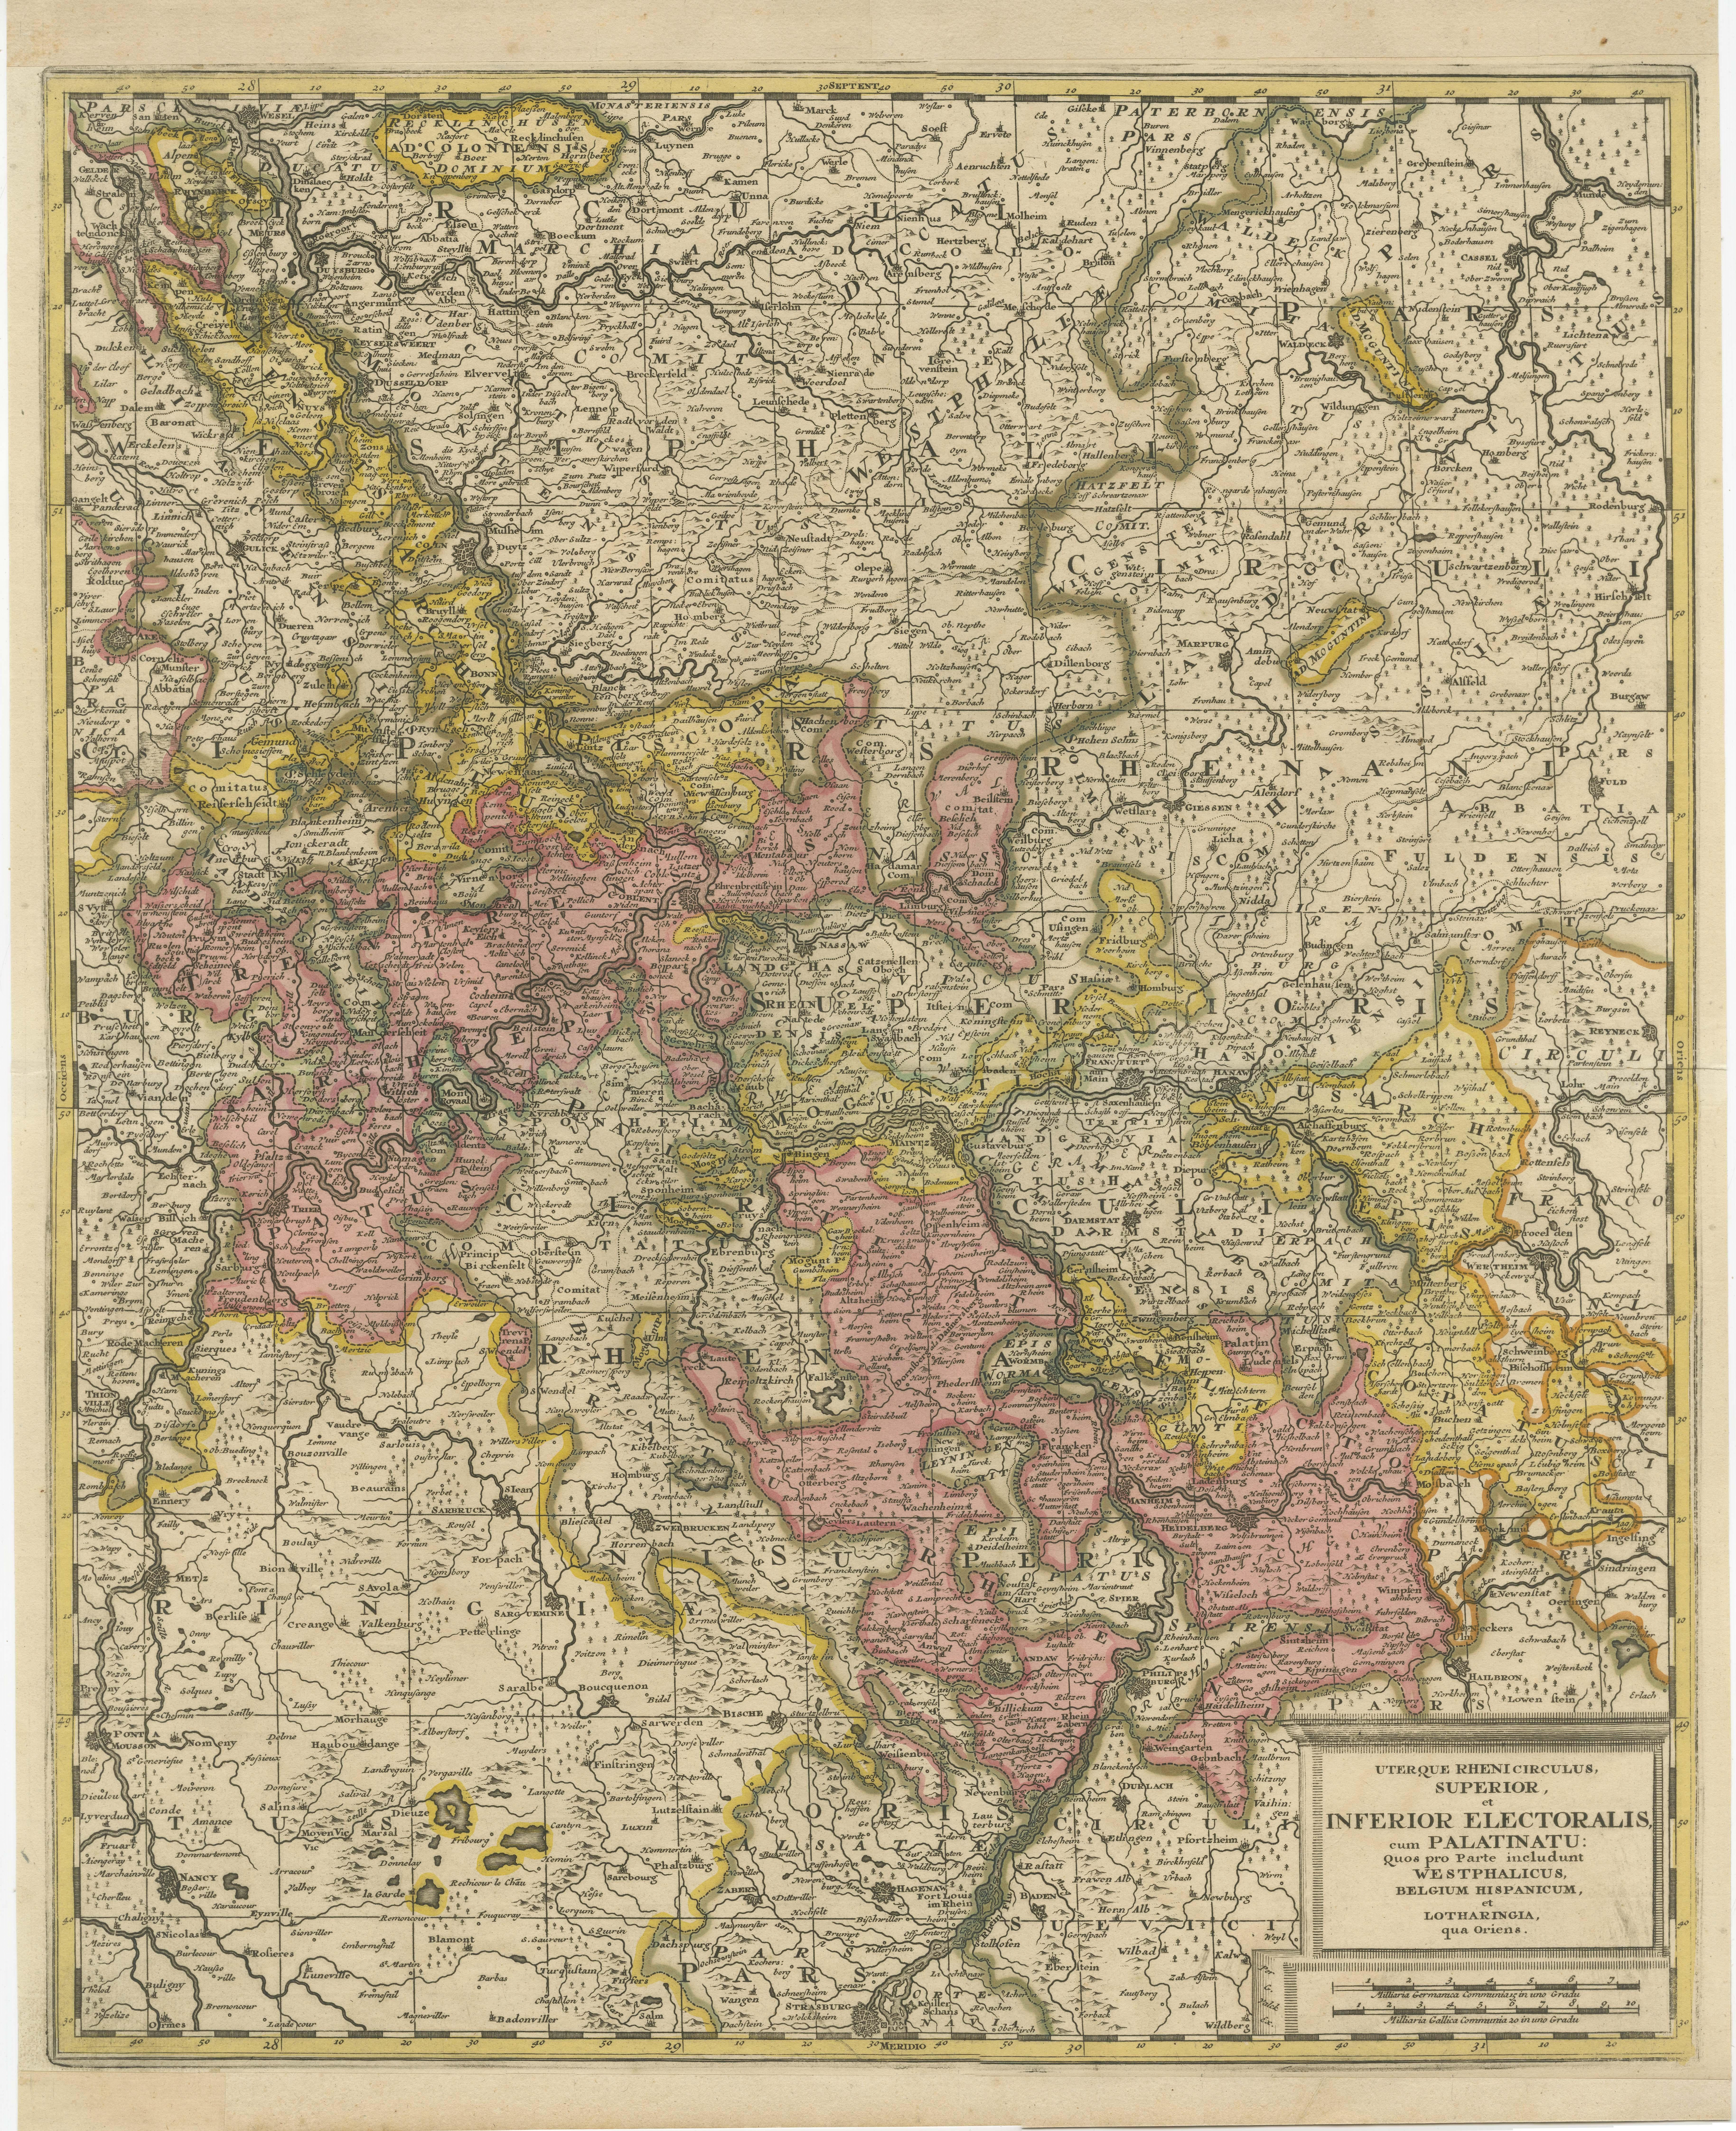 Antique map titled 'Uterque Rheni Circulus Superior (..)'. Fine old color map of the area centered on the Rhine River, from Strassbourg to Wesel and Duisburg, Germany. The map also covers a large stretch of the Moselle River (from Nancy to Coblentz)